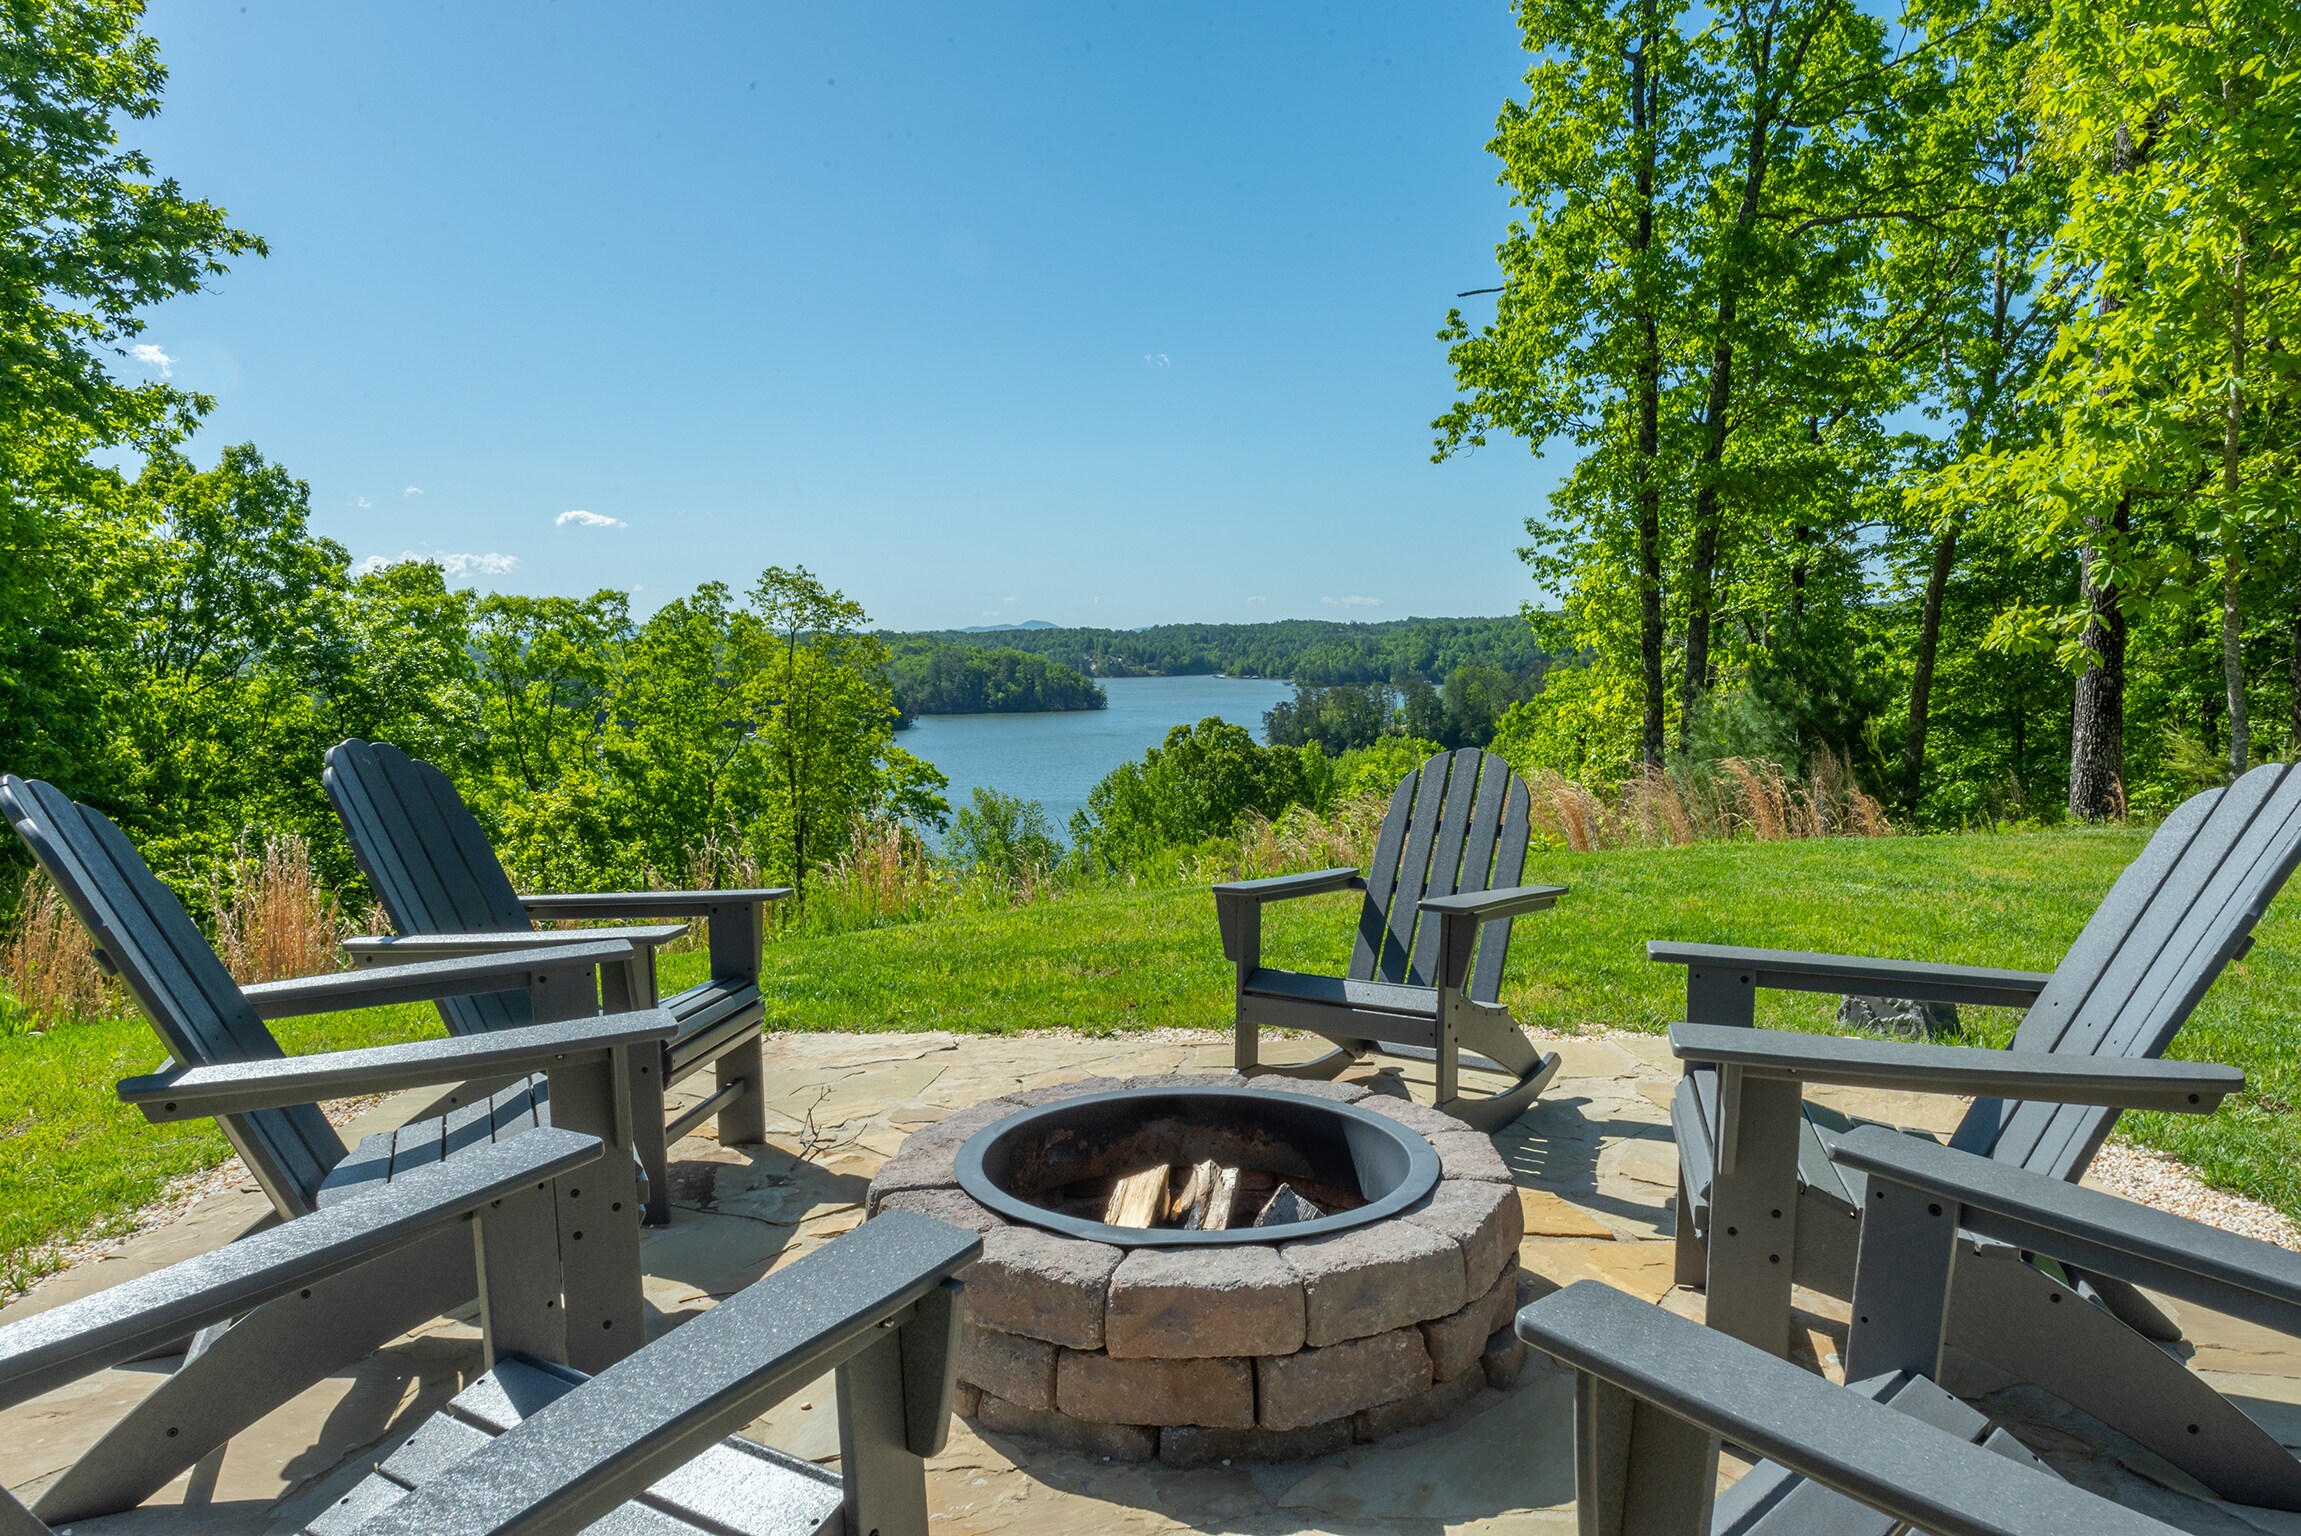 Gather around the outdoor fire pit to take in the stunning lakeside views & stargaze into the late night hours.